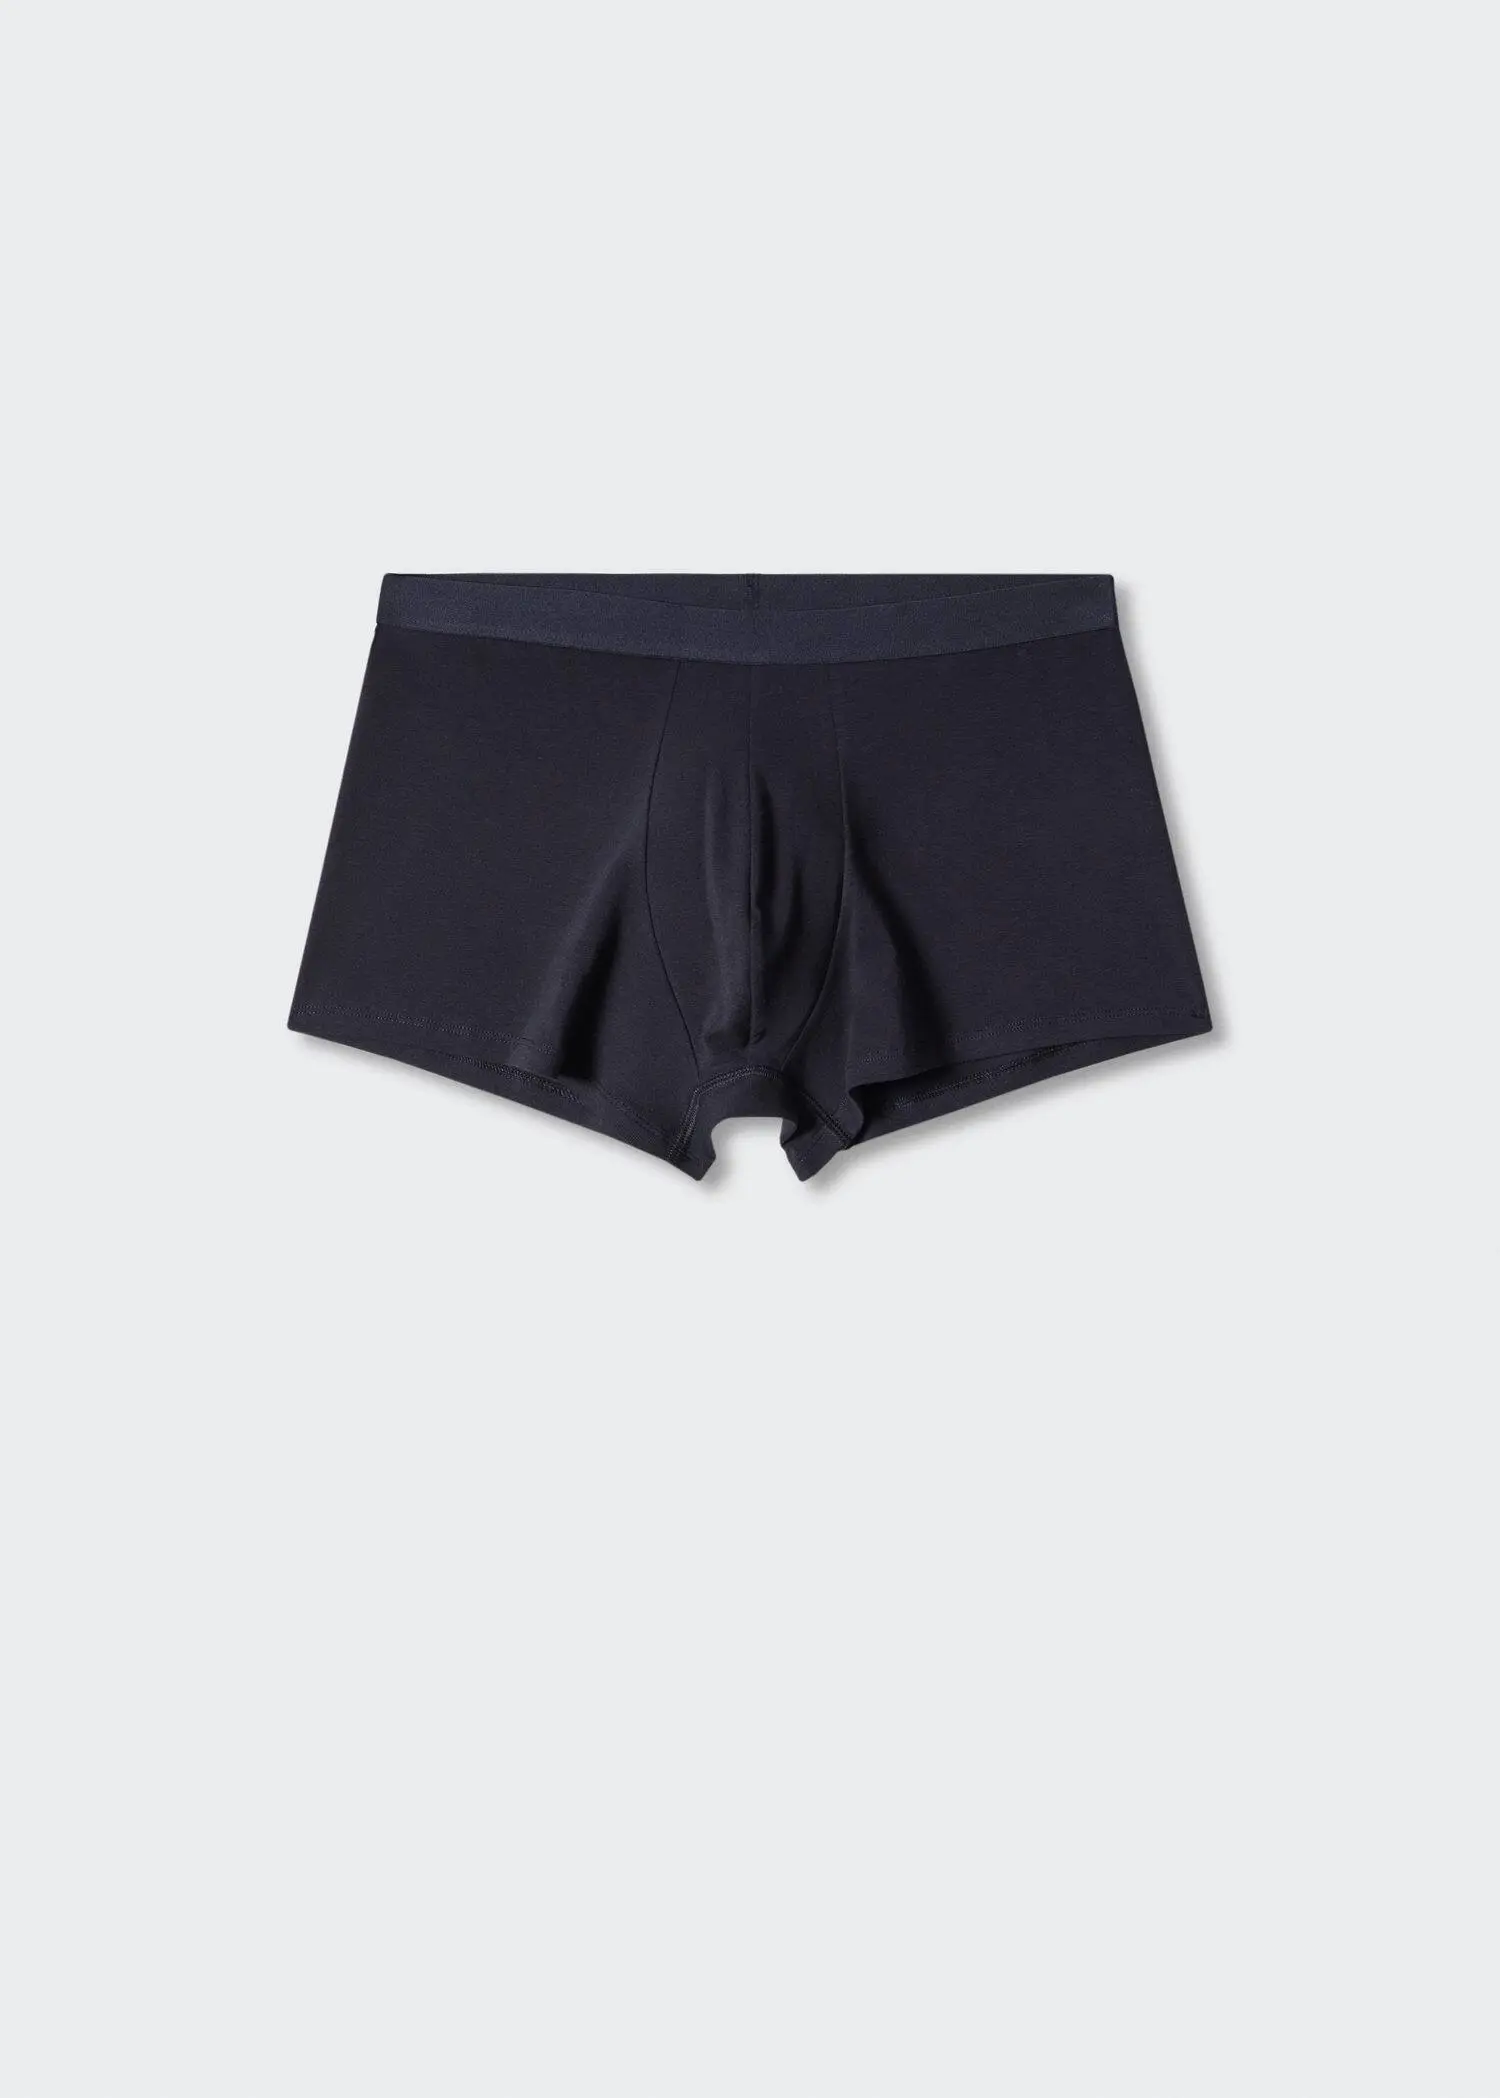 Mango 3-pack cotton boxers. a pair of black boxers are on a white surface. 